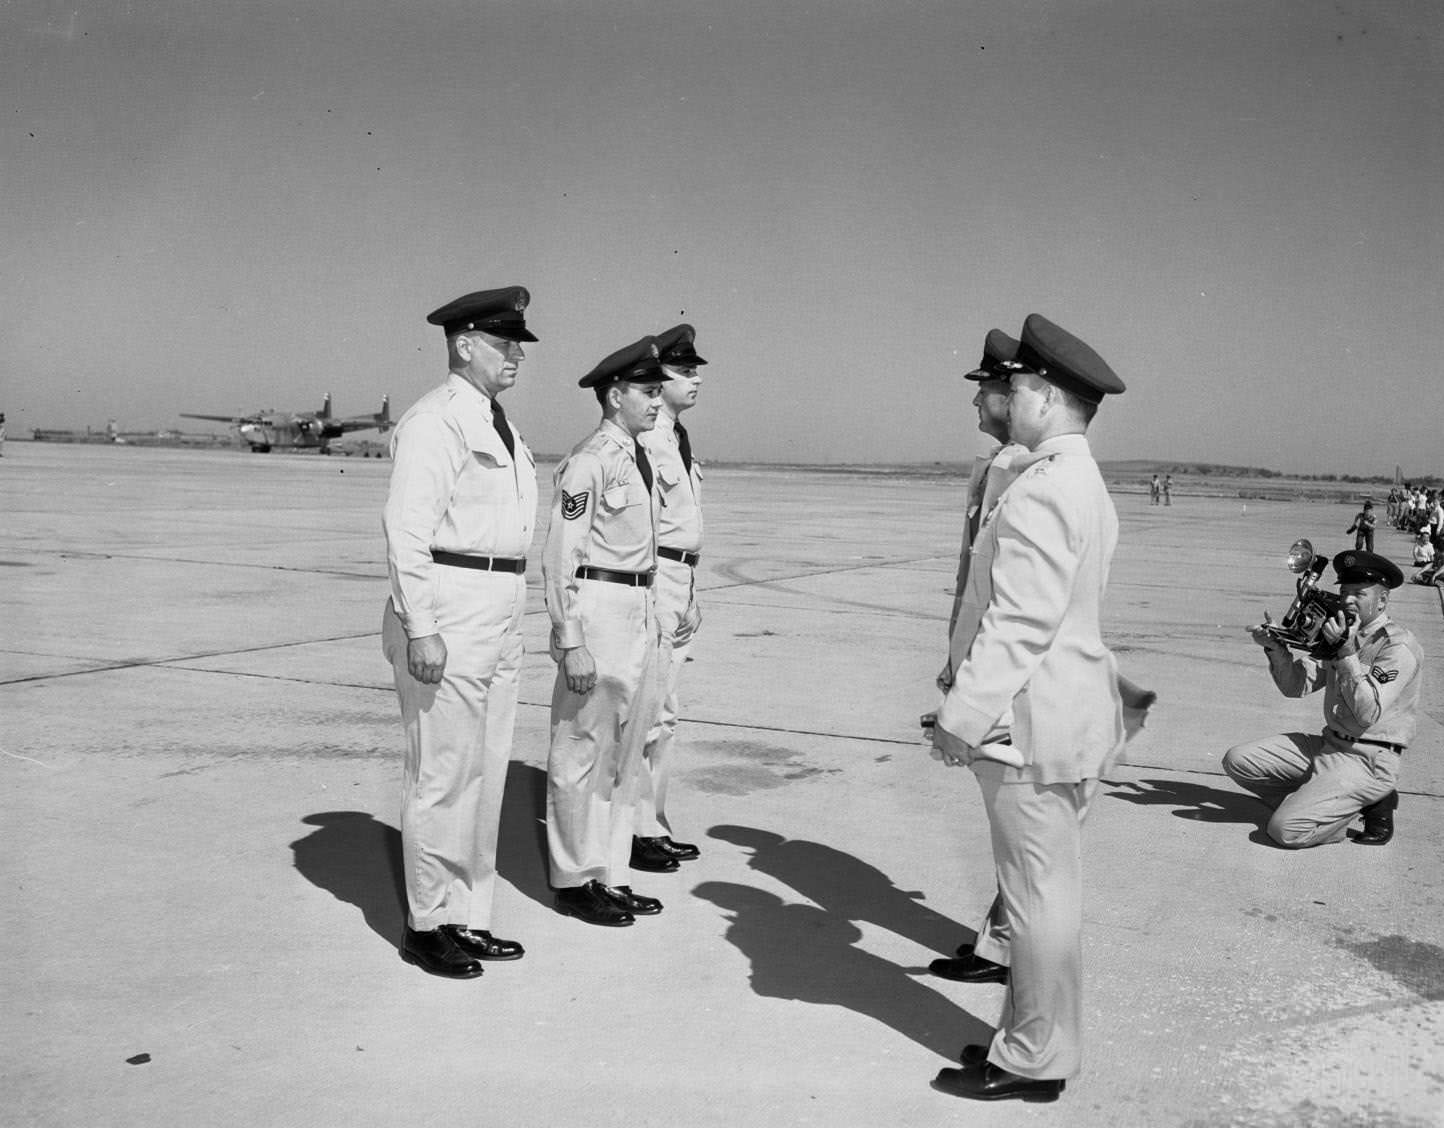 Five Air Force personnel standing on a runway at the Dyess Air Show in Abilene, Texas, 1955